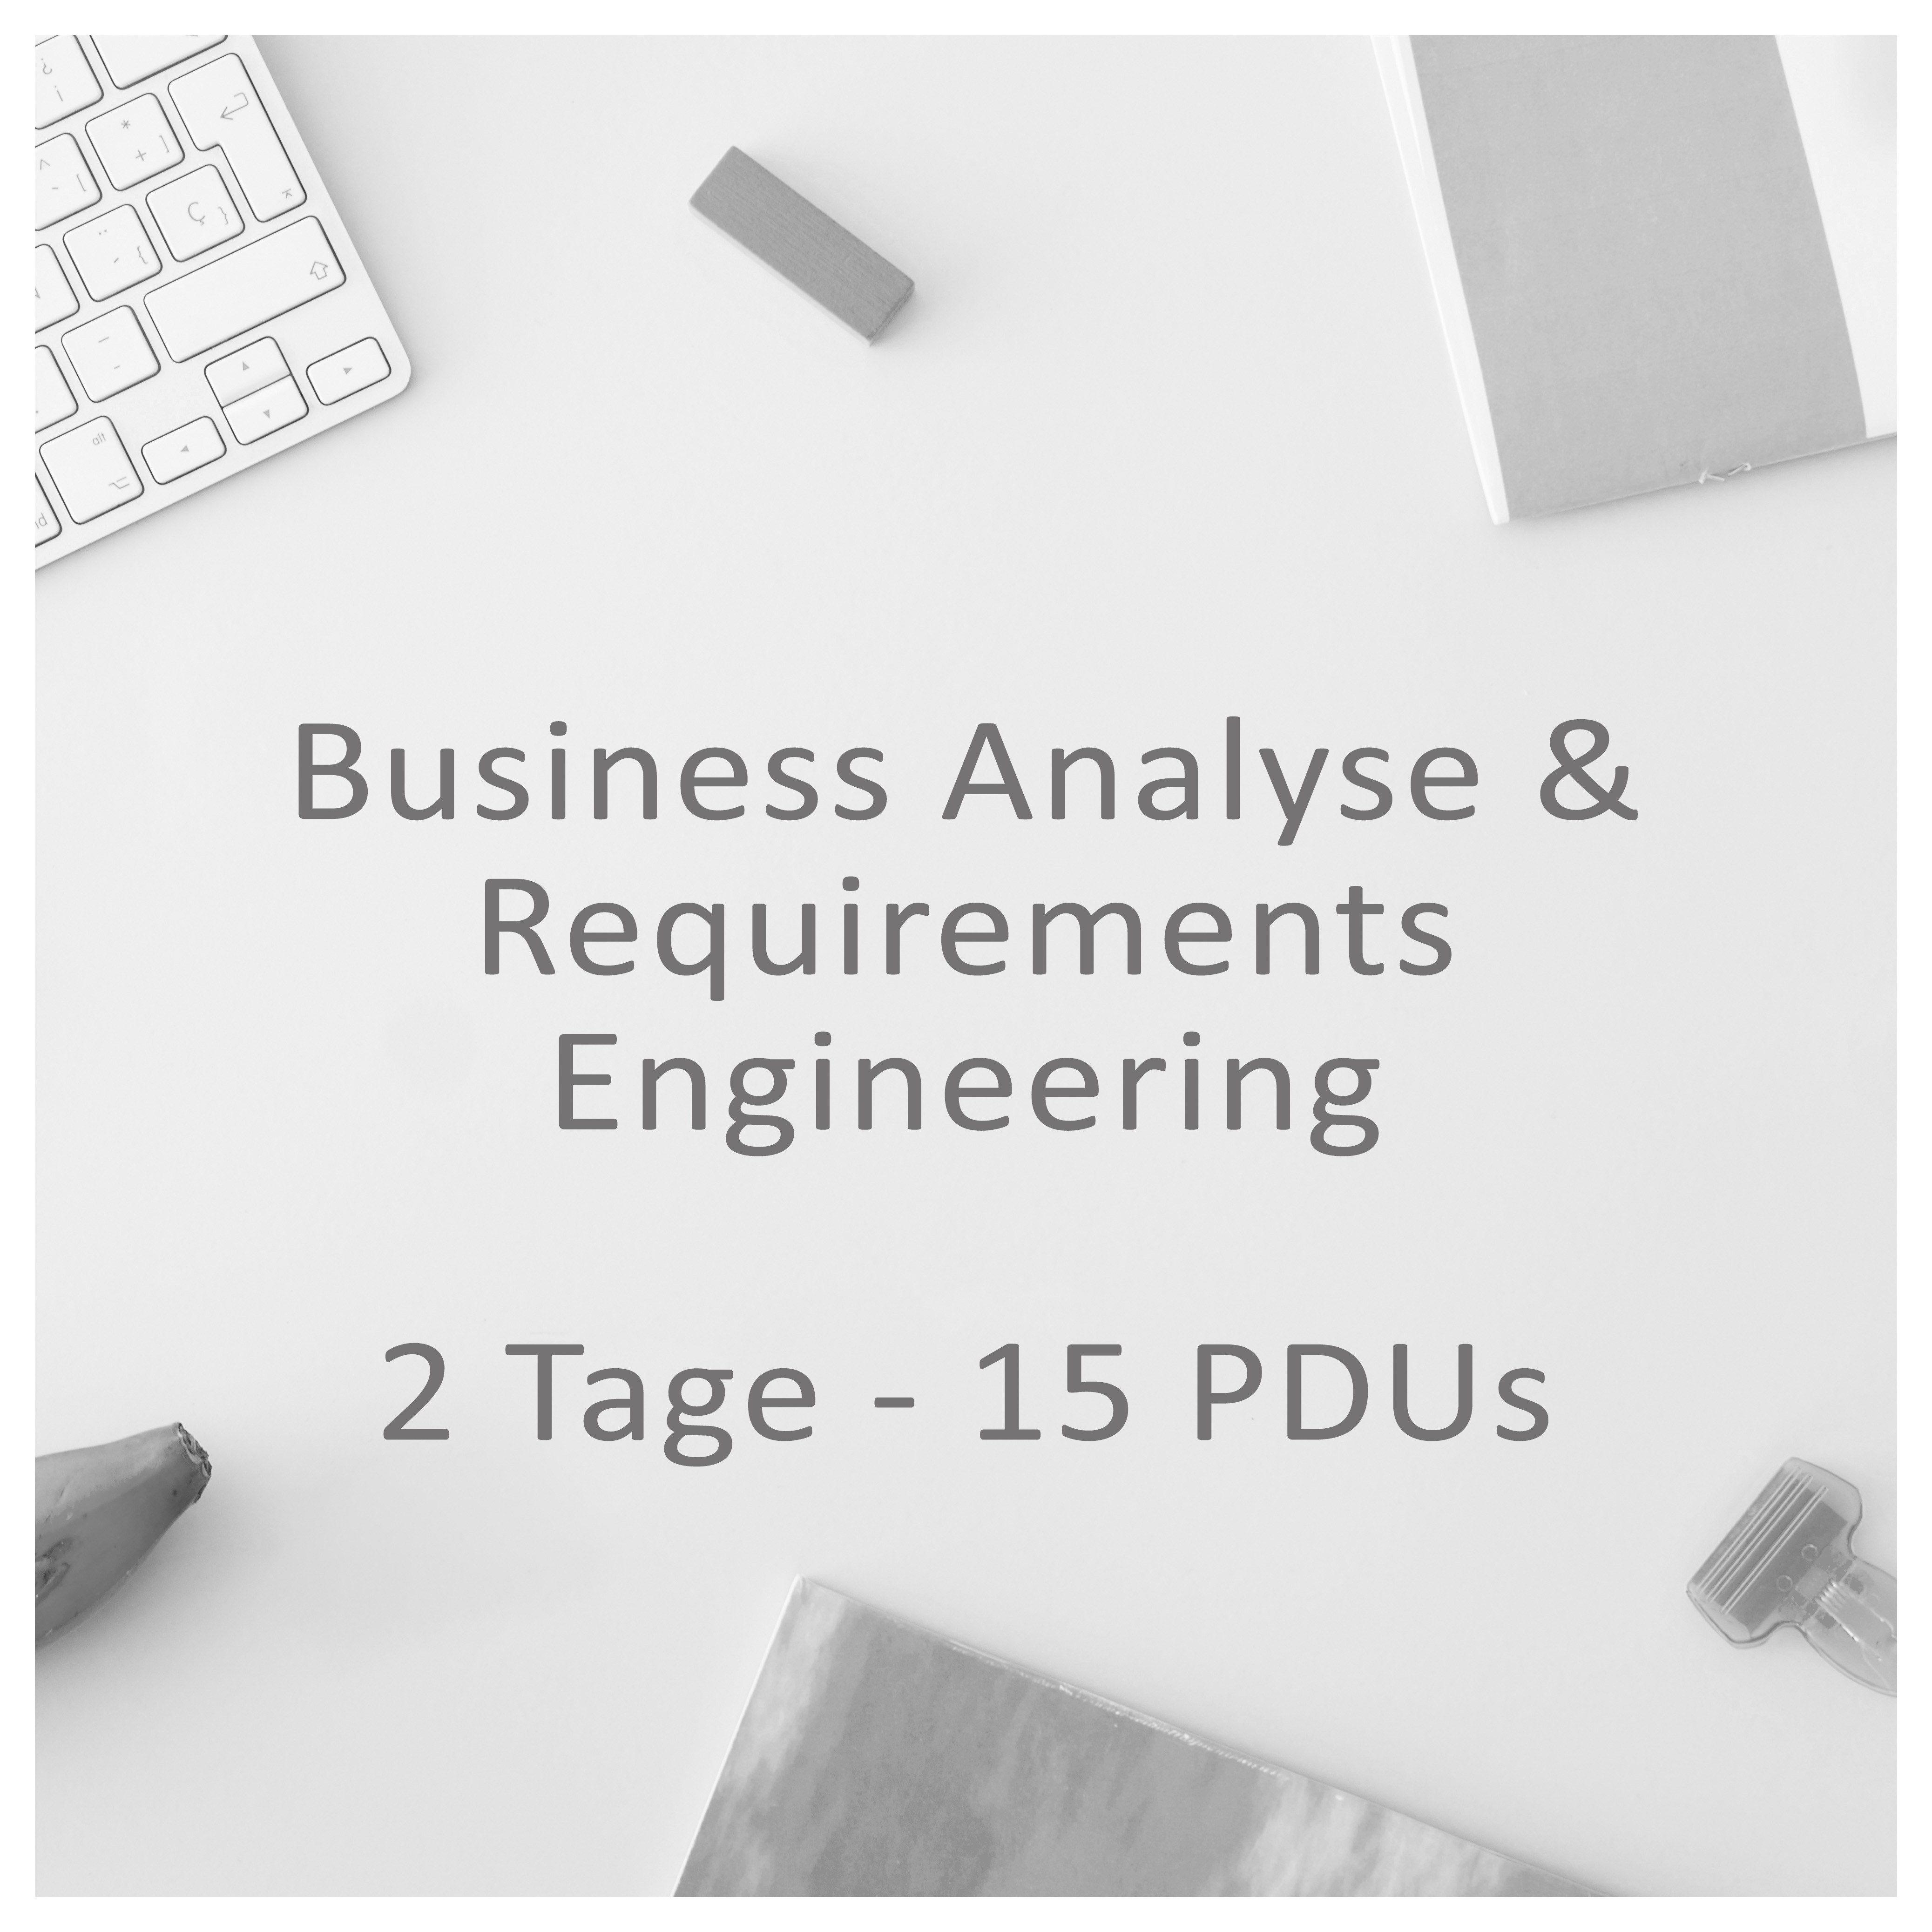 Business Analyse & Requirements Engineering